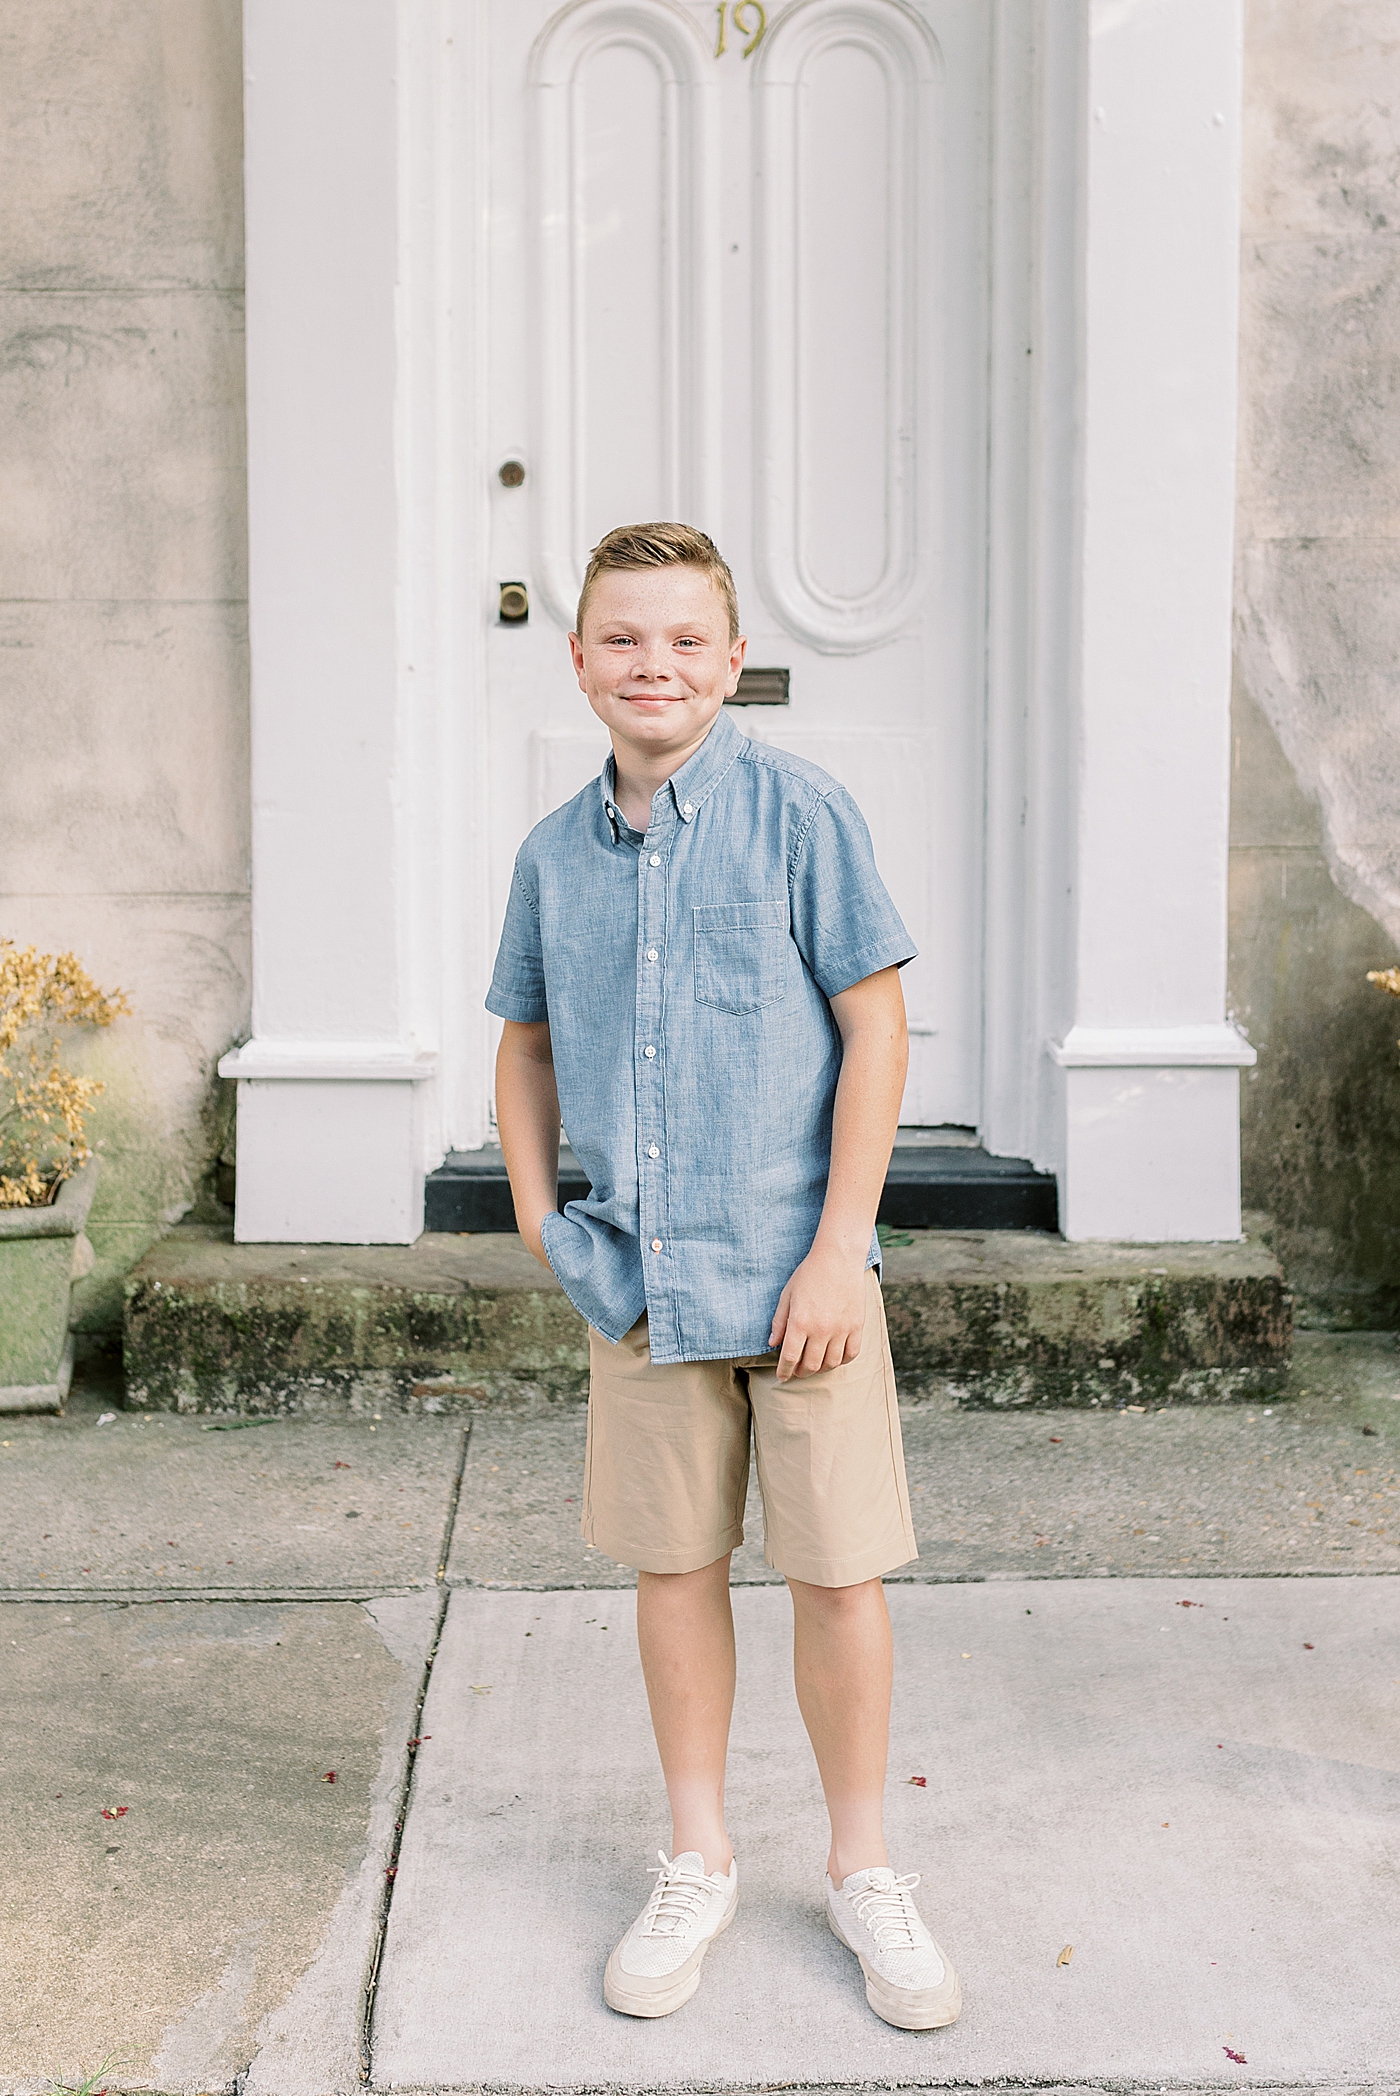 Little boy in a blue shirt with his hand in his pocket | Photo by Caitlyn Motycka Photography